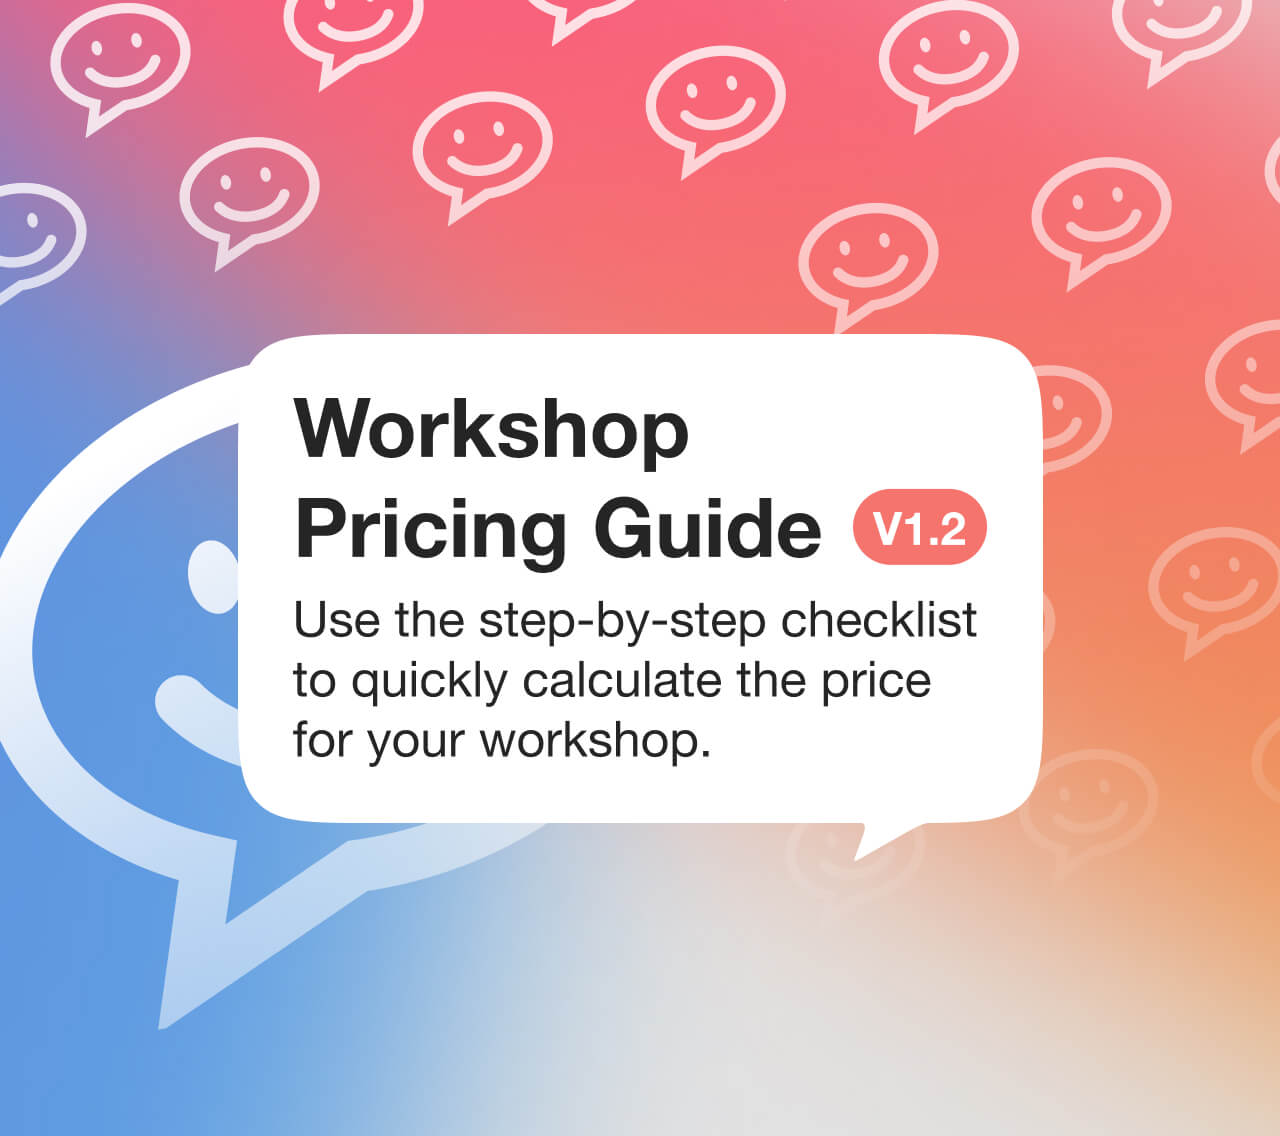 Subscribe to our weekly newsletter and get the free editable Workshop Pricing Checklist.